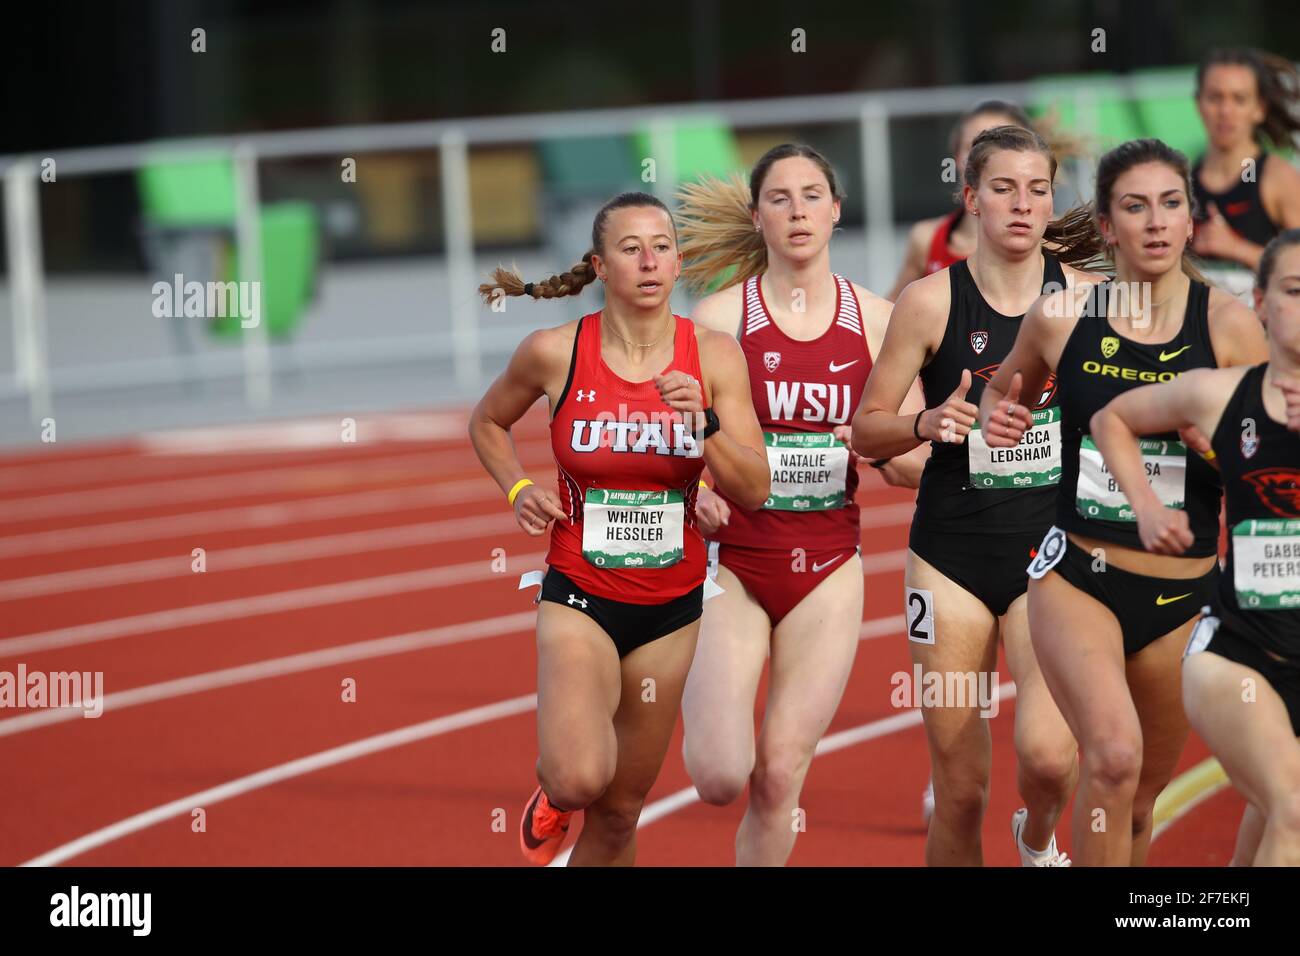 April 02, 2021: Whitney Hessler of Utah competes in the Women's 1500 during the Hayward Premiere at the newly remodeled $200 million dollar Hayward Field Track & Field stadium, Eugene, OR. Larry C. Lawson/Cal Sport Media Stock Photo